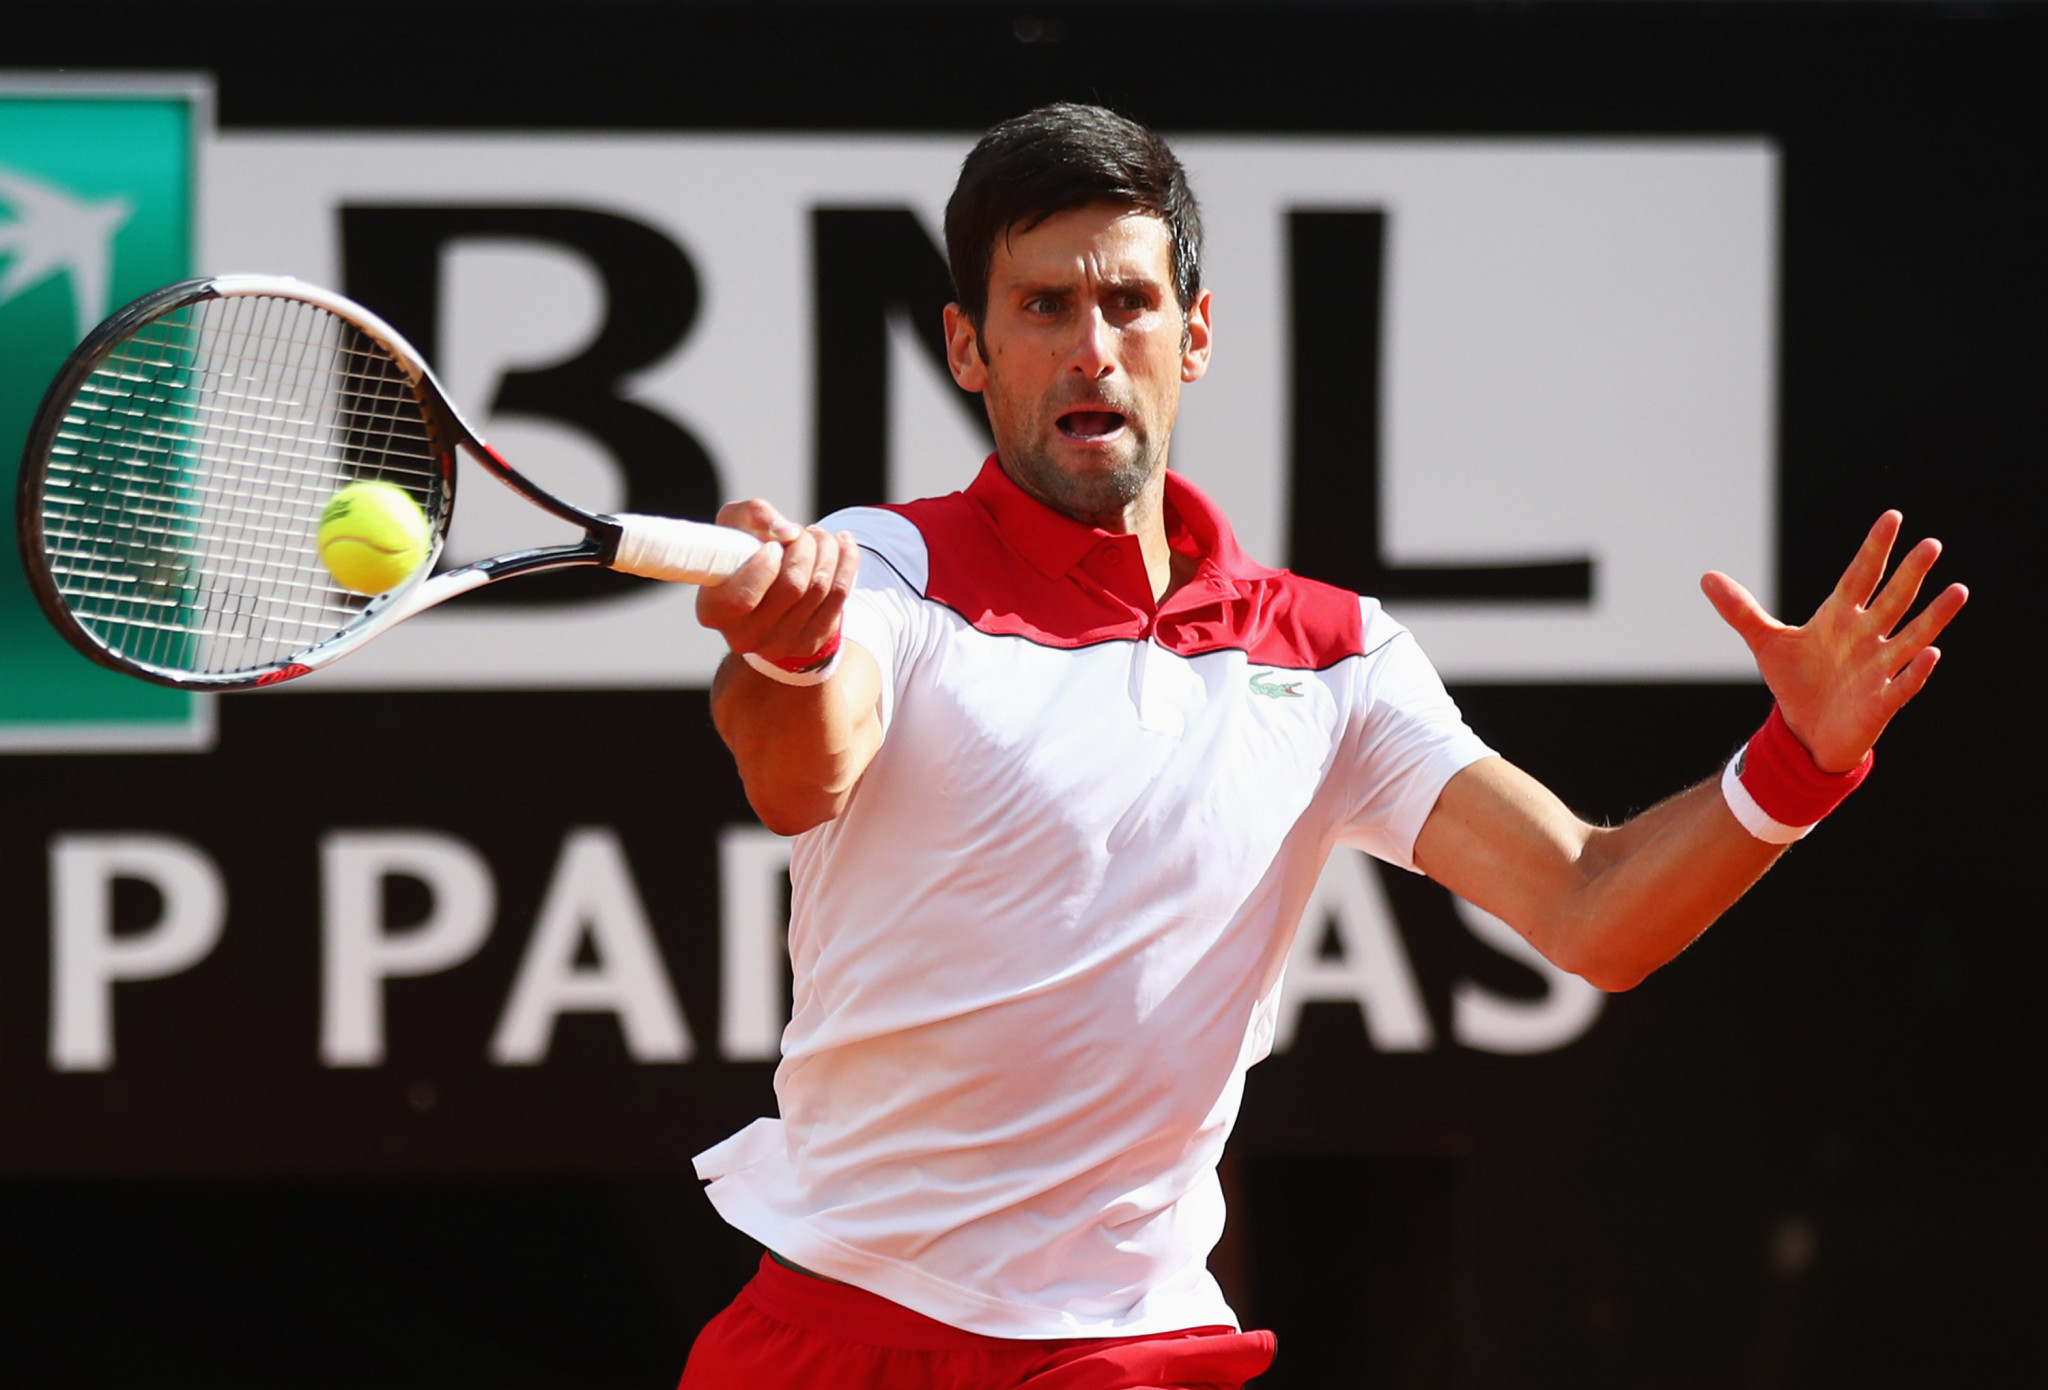 Novak Djokovic recovered from his shock loss in Madrid last week by winning in Rome today ©Getty Images